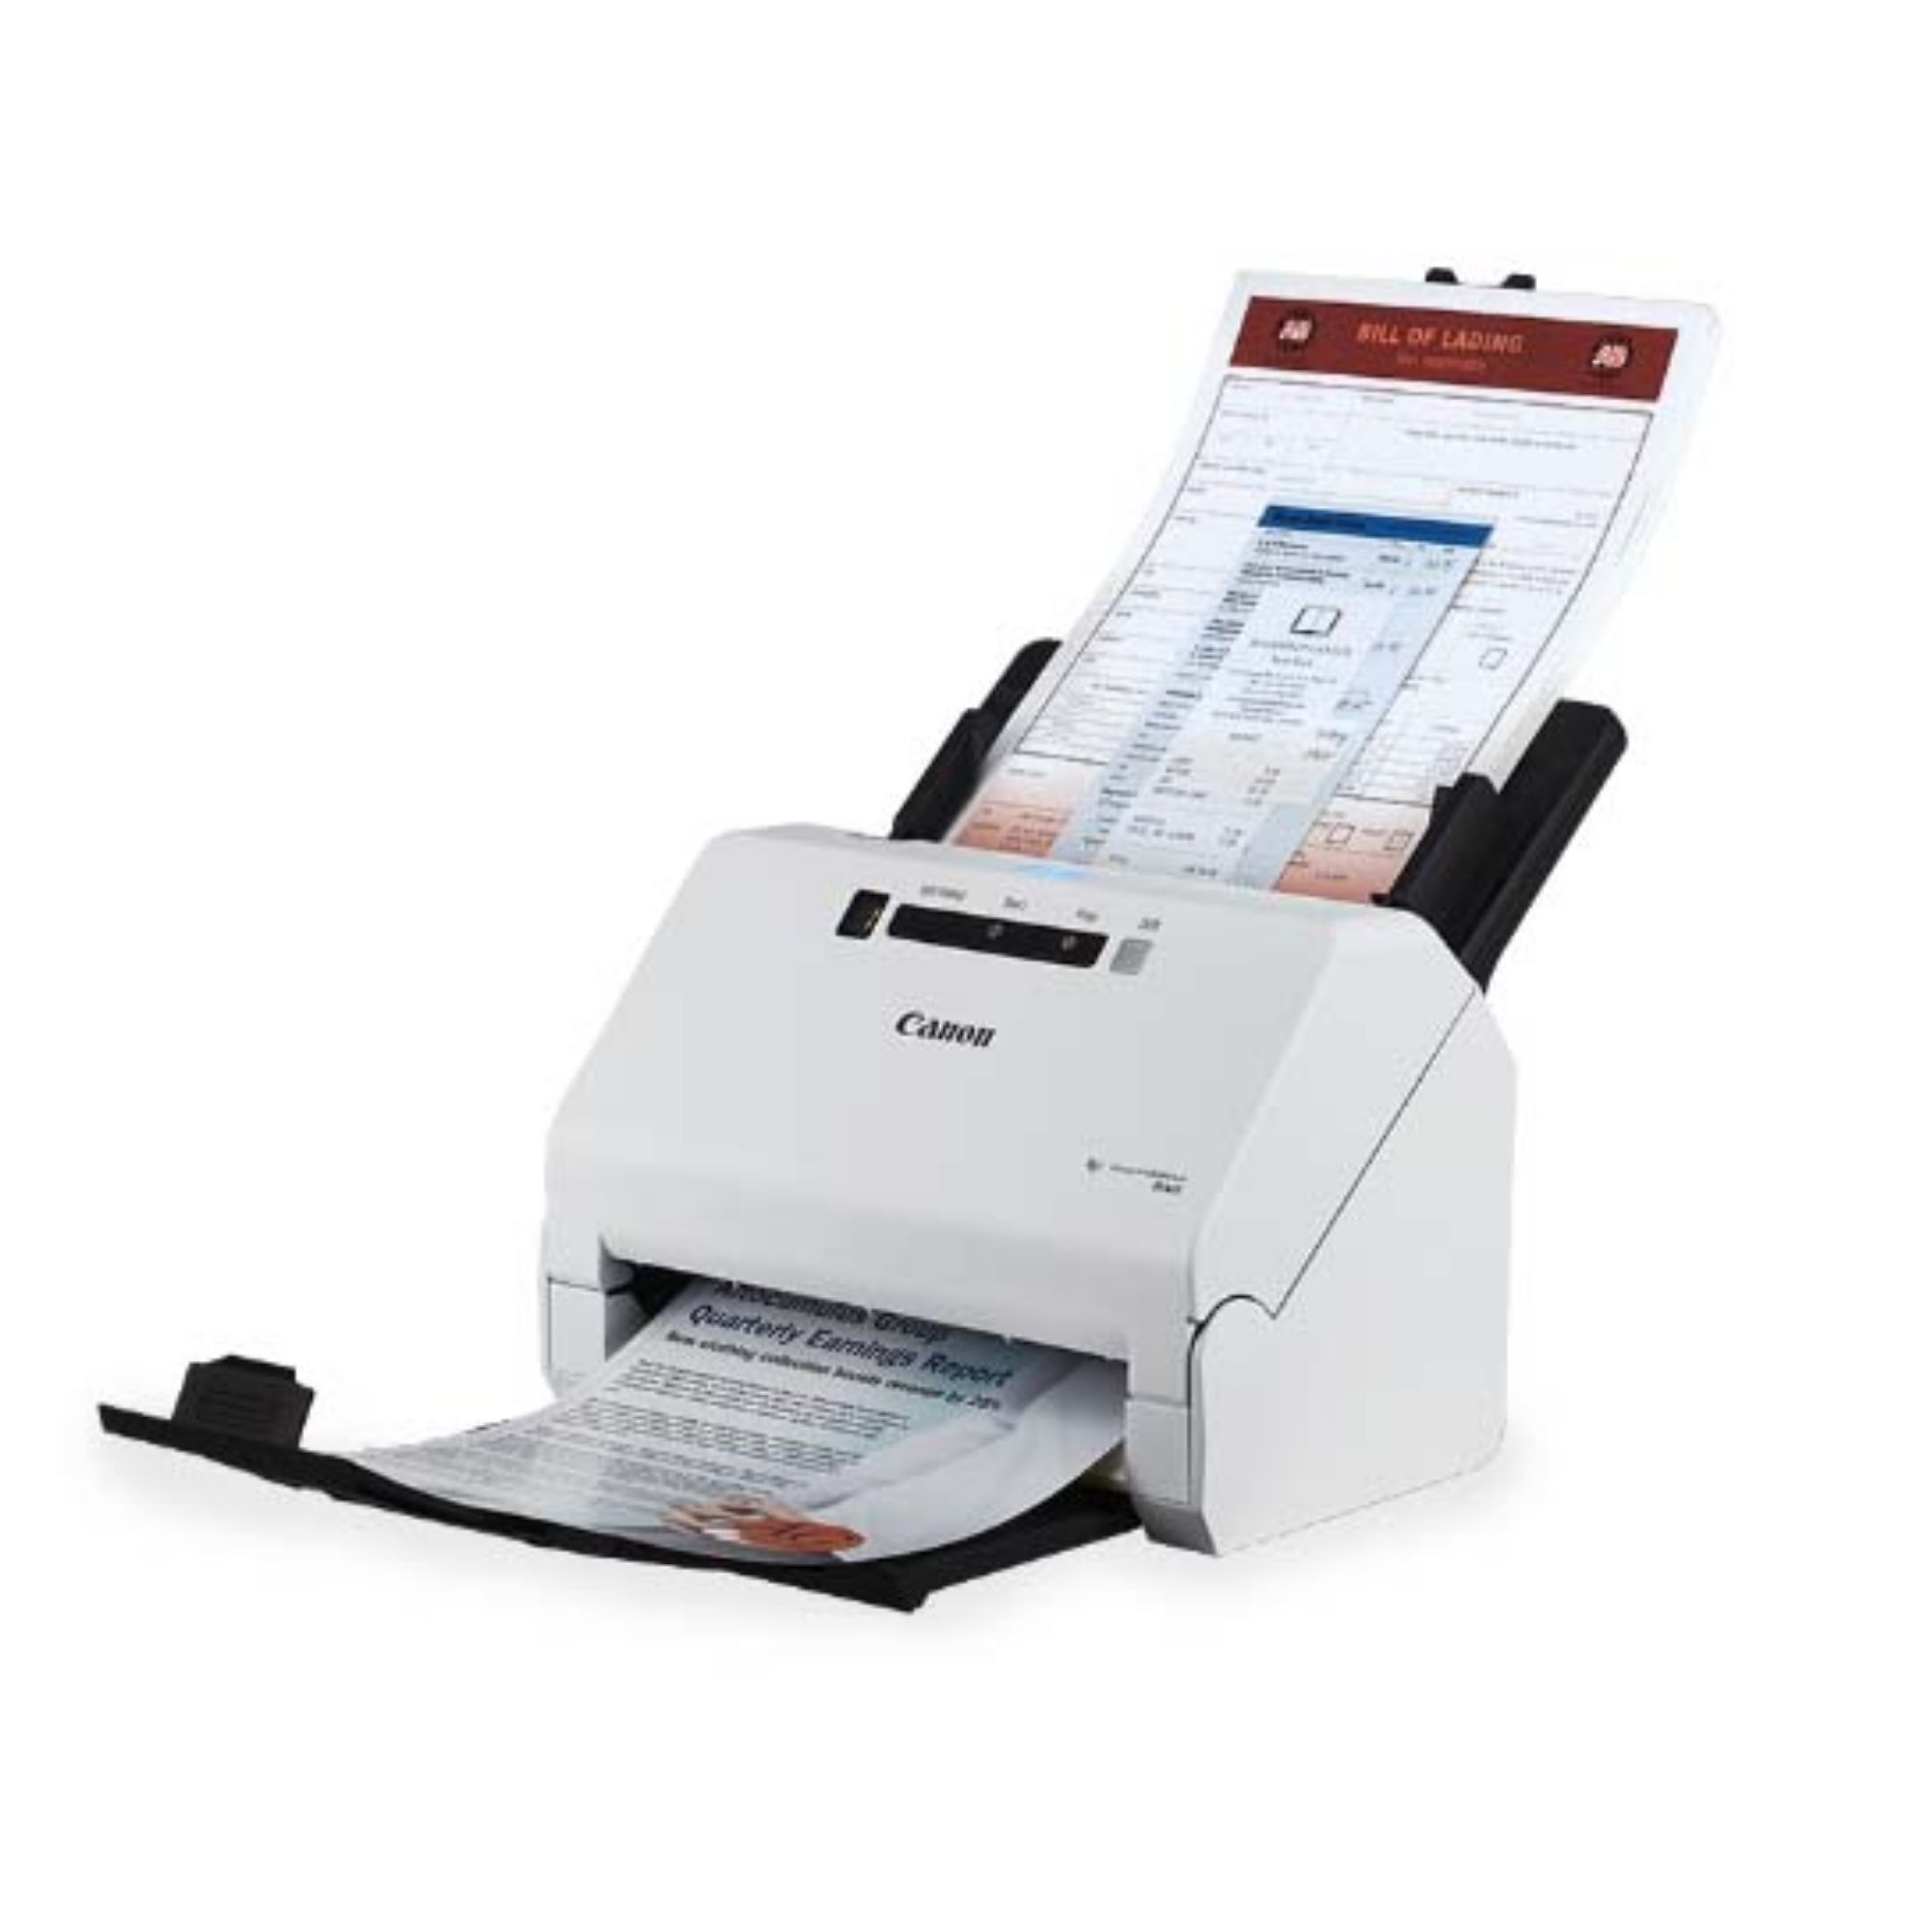 Canon ImageFORMULA R40 Office Document Scanner For PC and Mac, Color